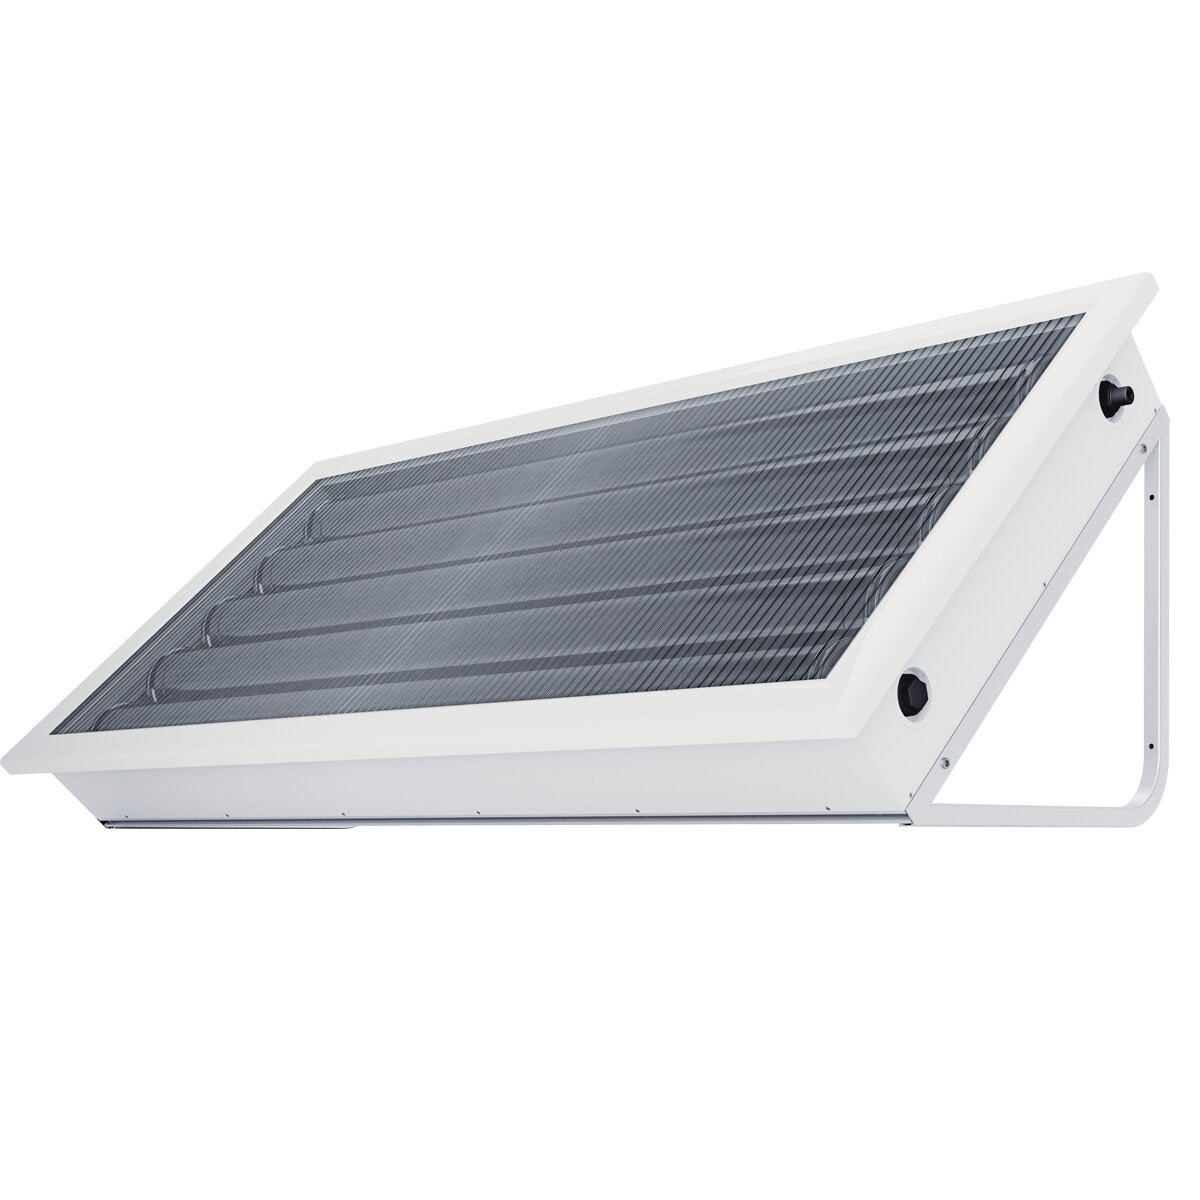 Pleion Ego 150 natural circulation white solar panel for flat and sloping roof 140 liters